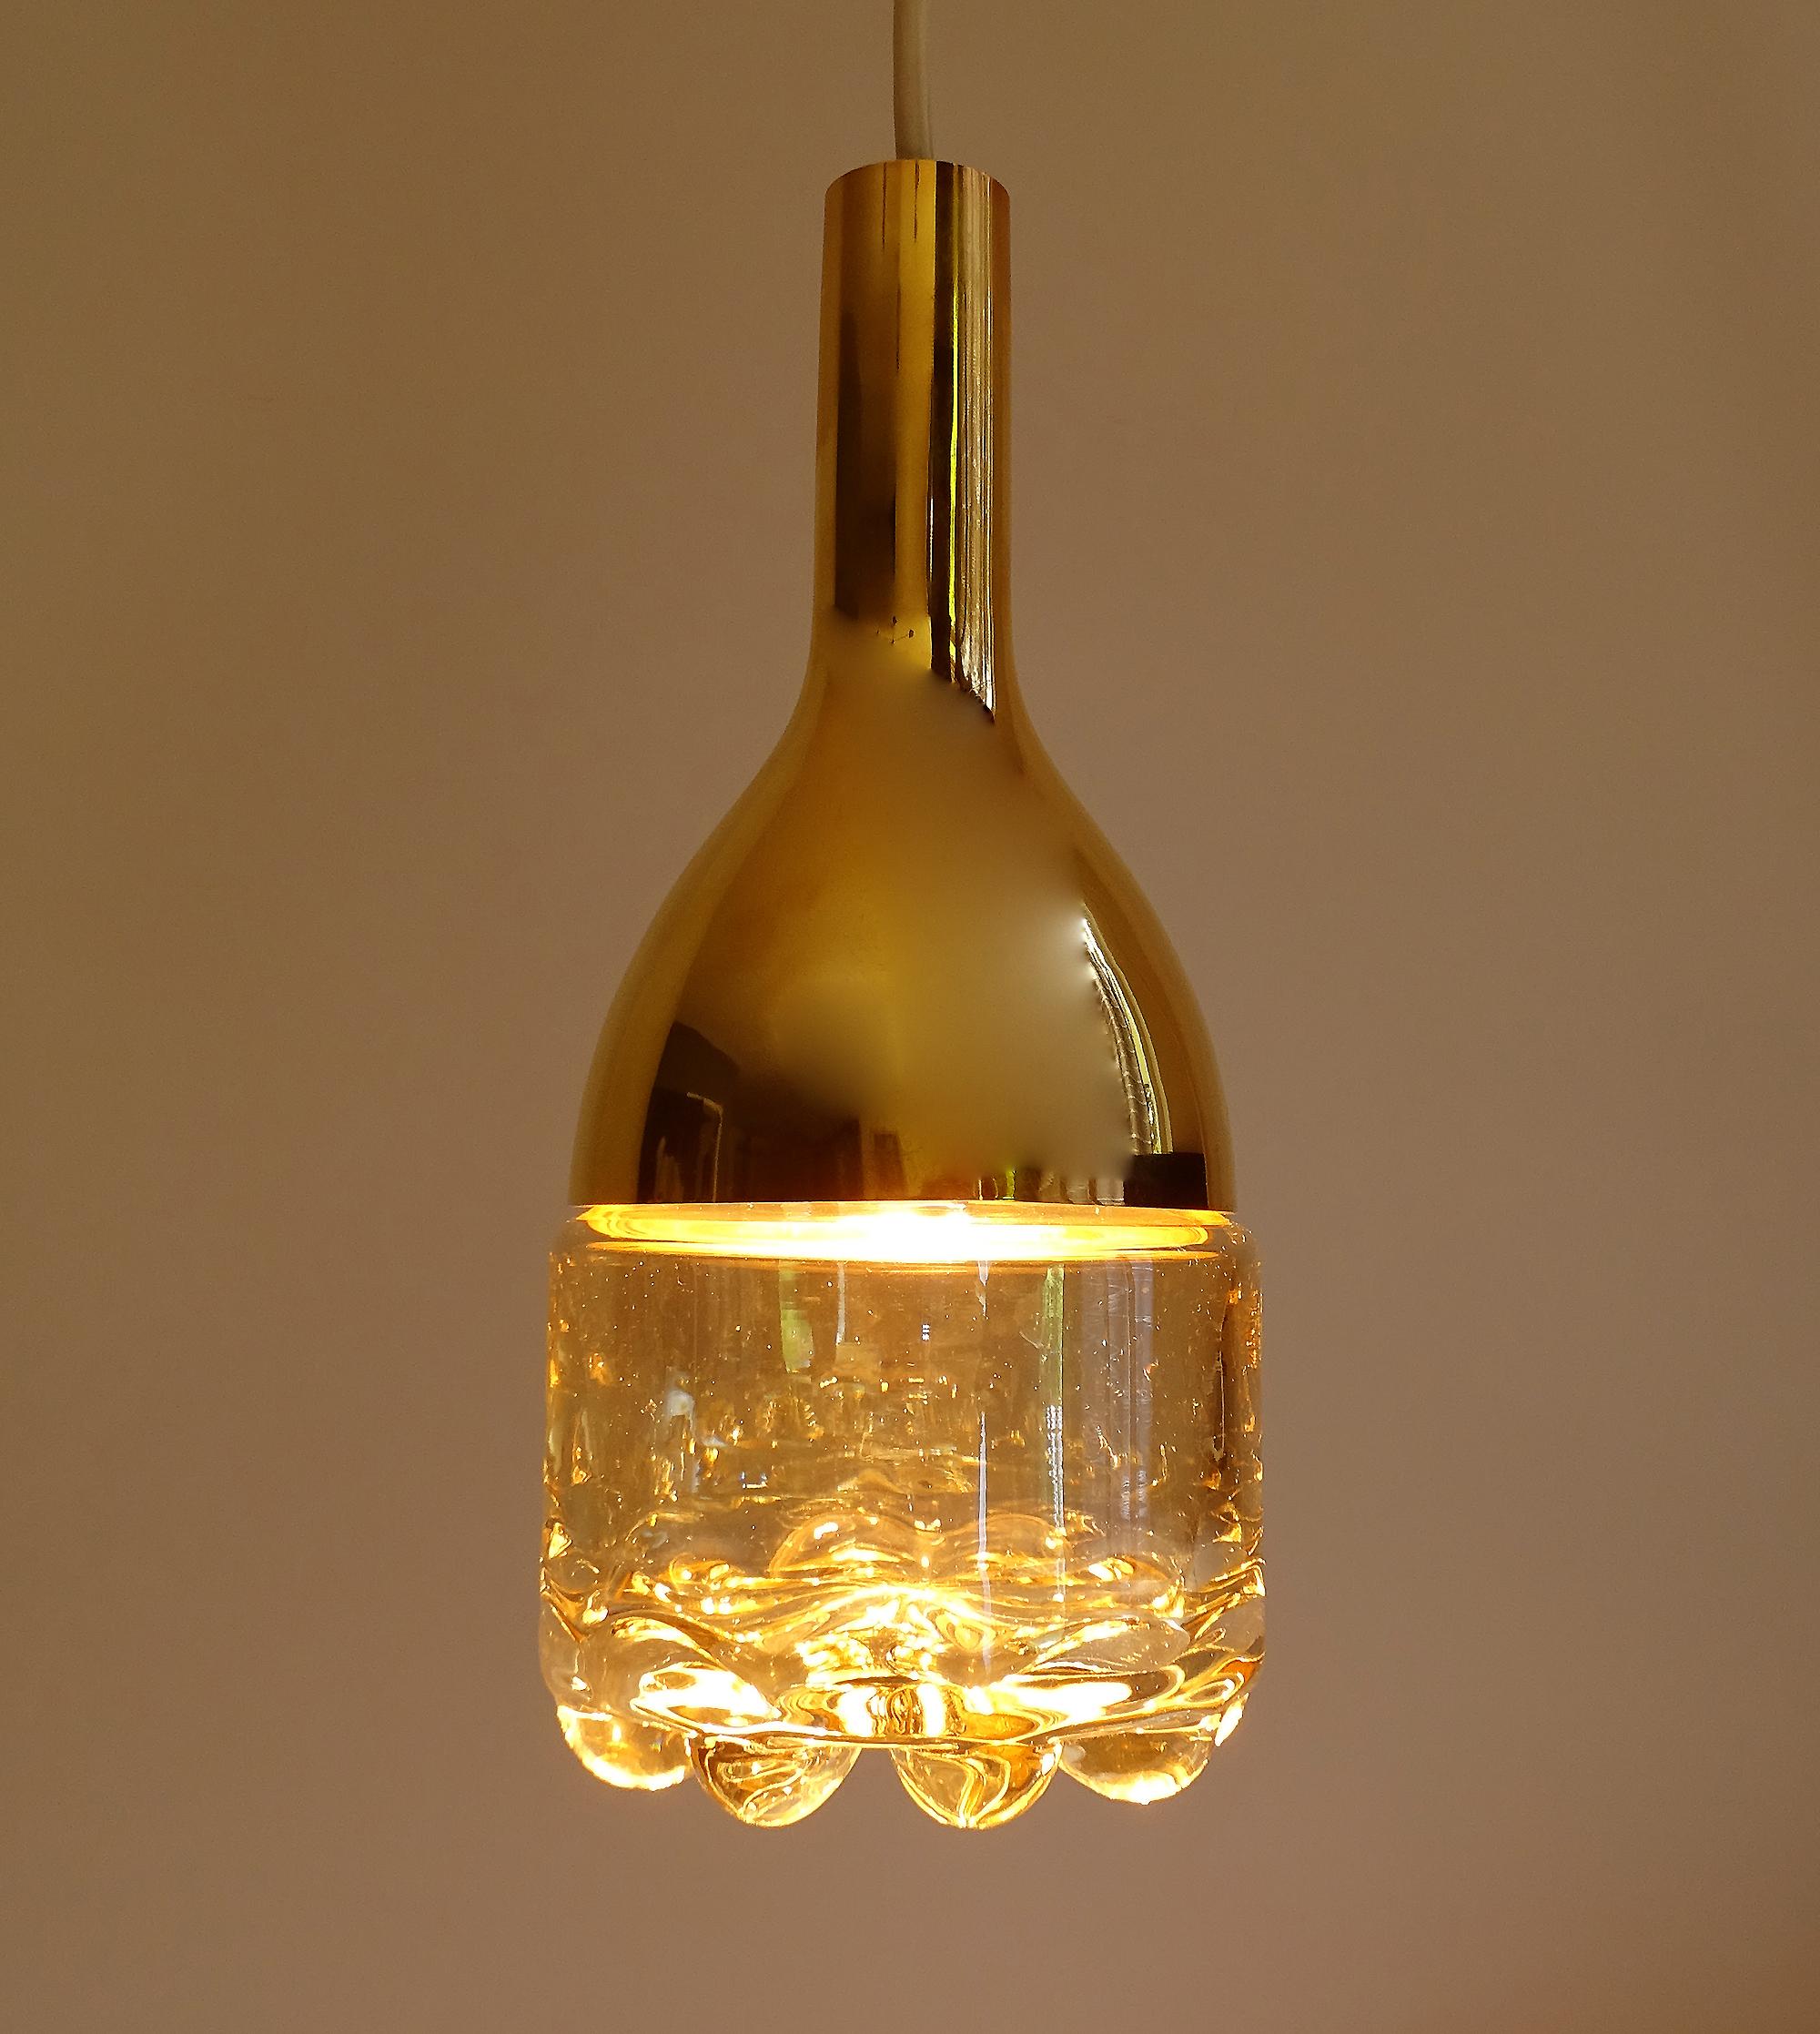 One of five pendant lights by Limburg featuring tumbler style blown glass shades with a spike pattern at the bottom, brass 